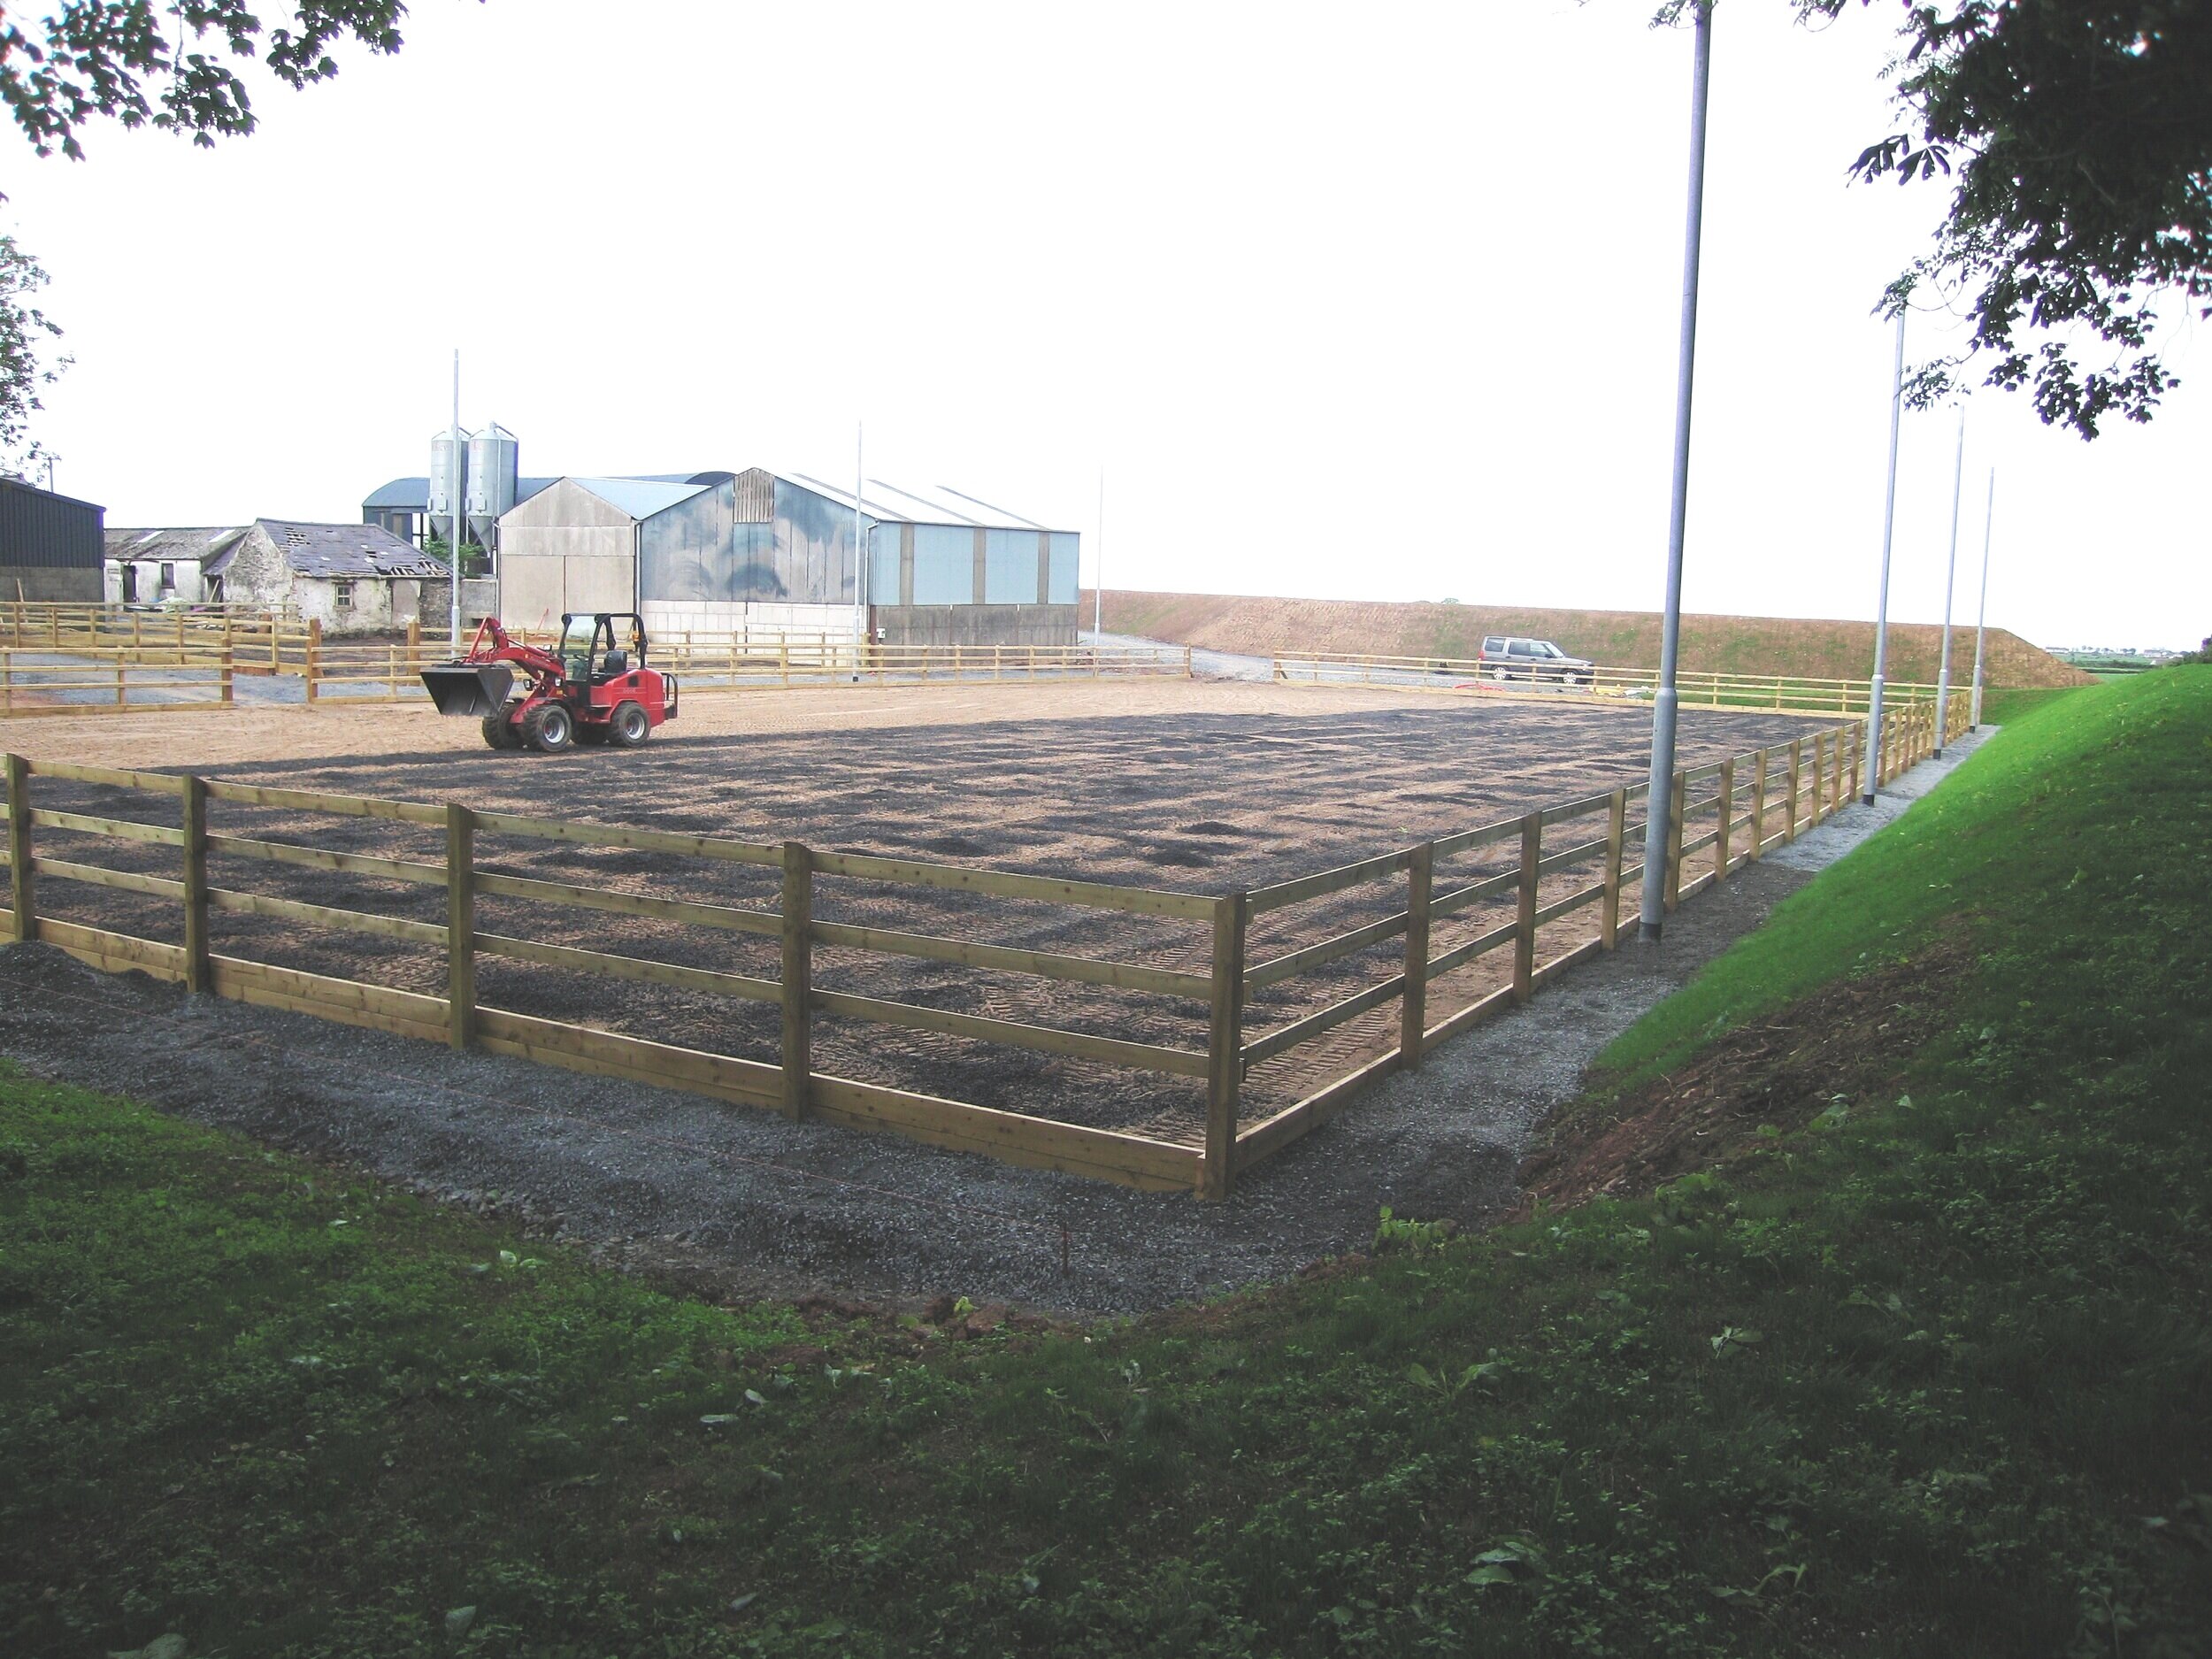 equestrian rubber for sandschool with fencing and landscaping uk dunnlandscapes